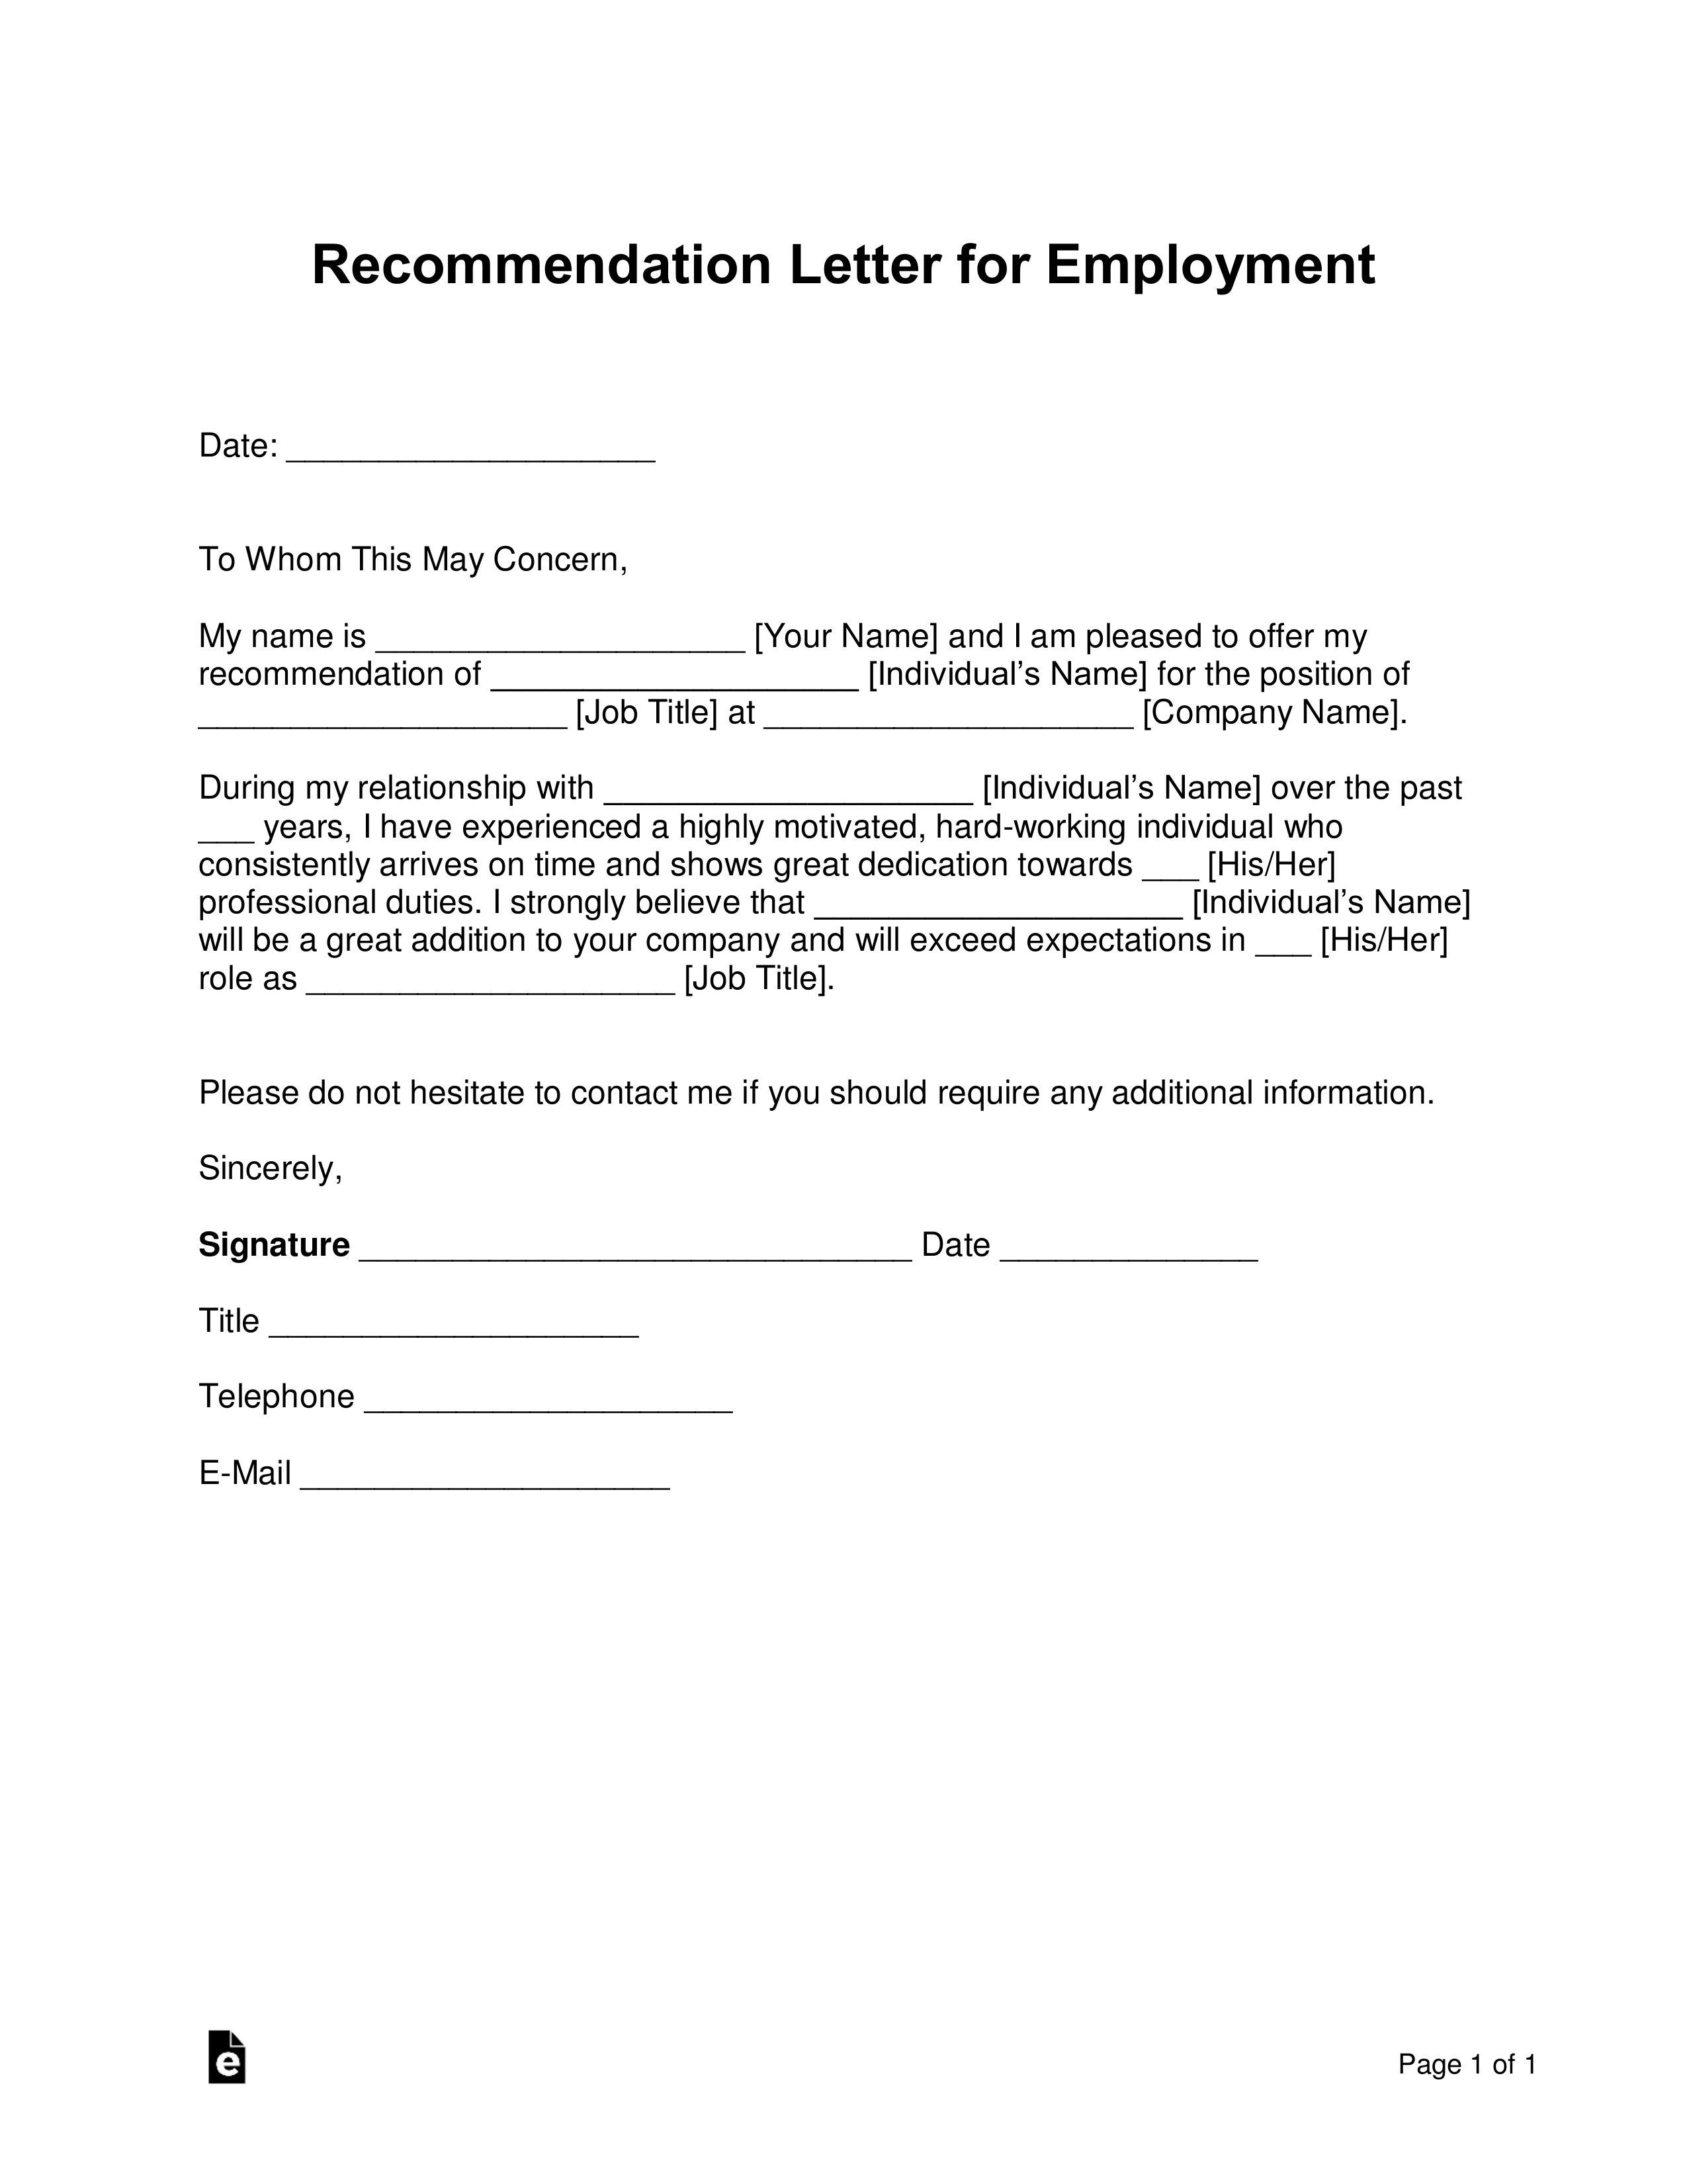 New Hire Letter Sample from eforms.com